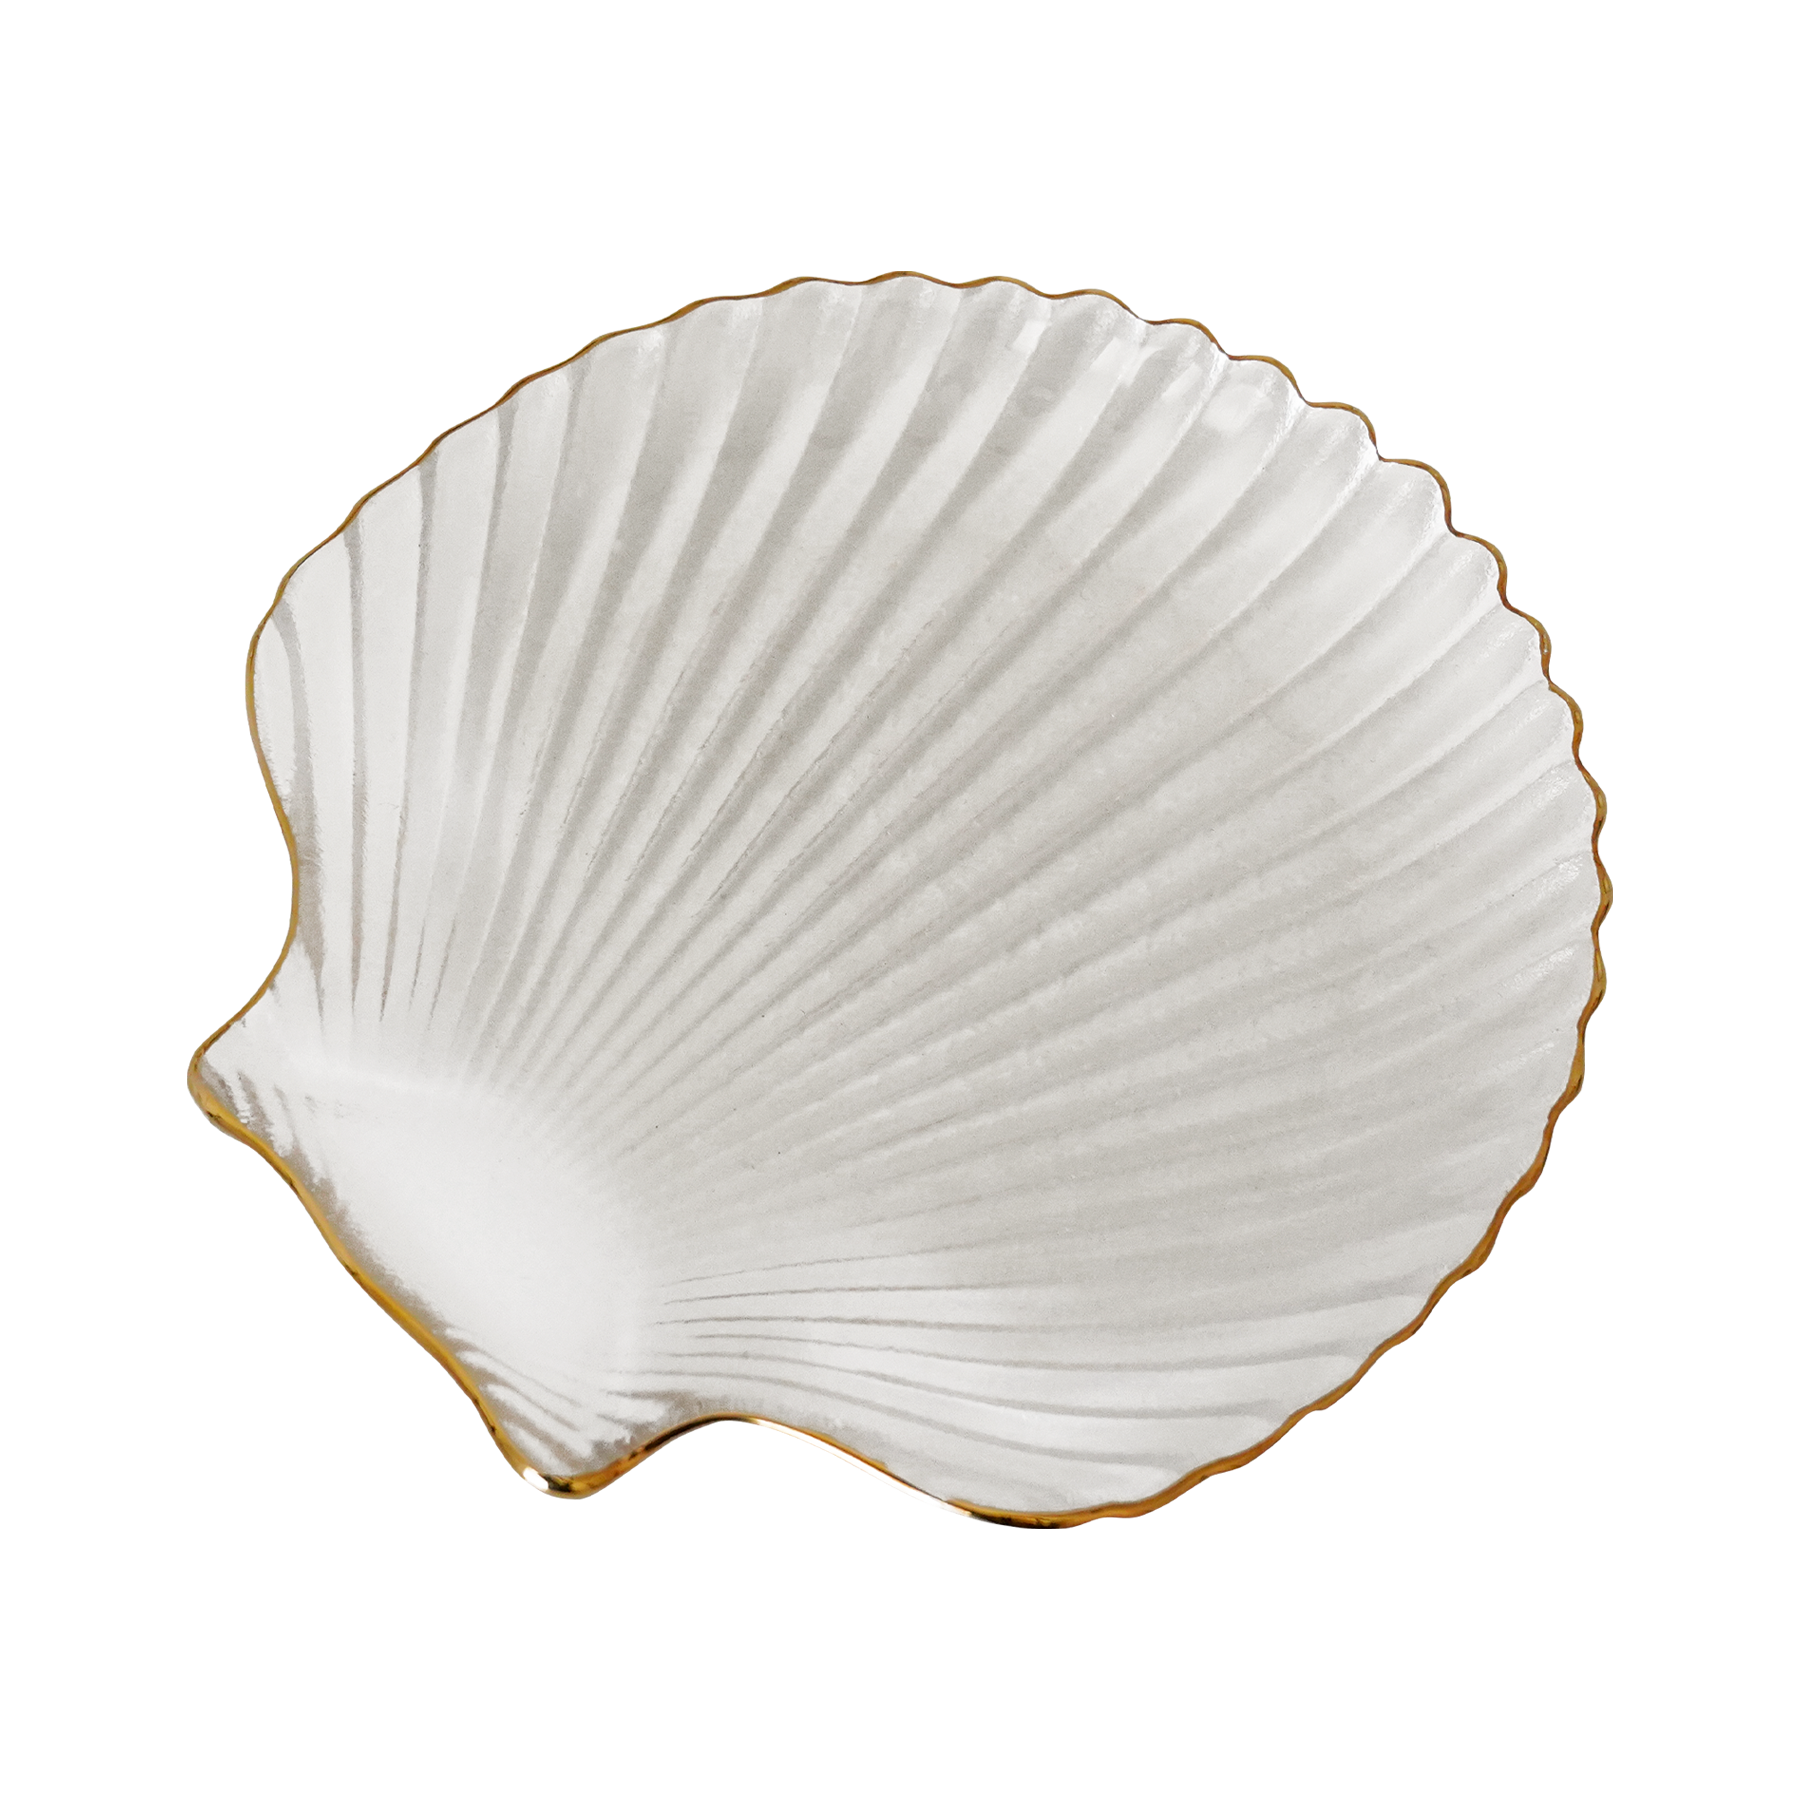 clear shell tray with a gold rim